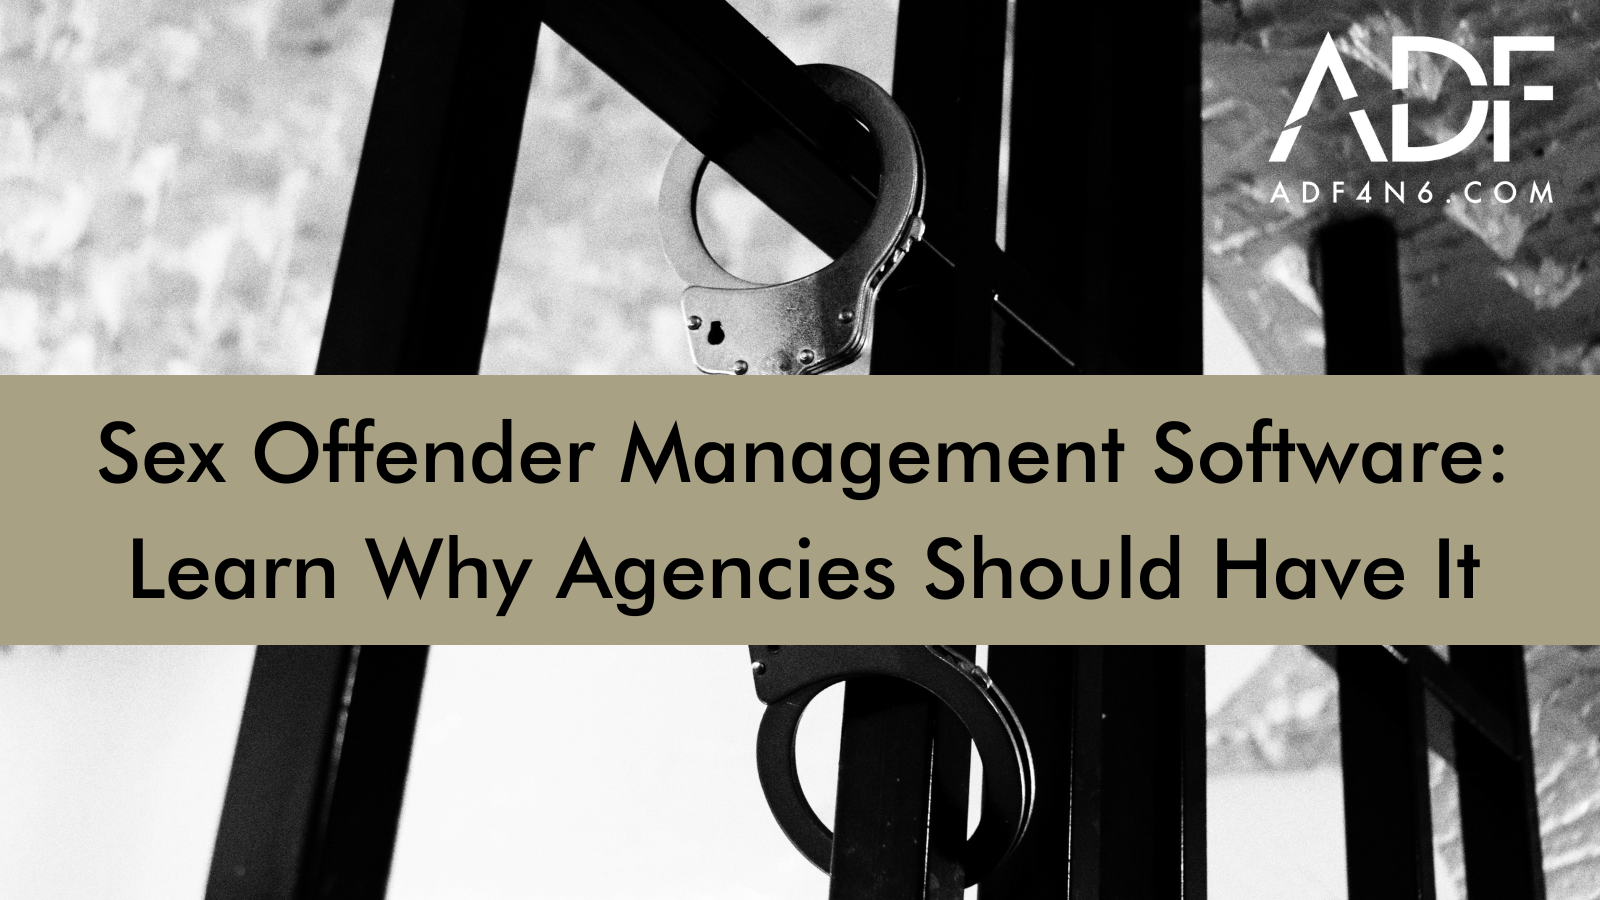 Sex Offender Management Software: Learn Why Agencies Should Have It